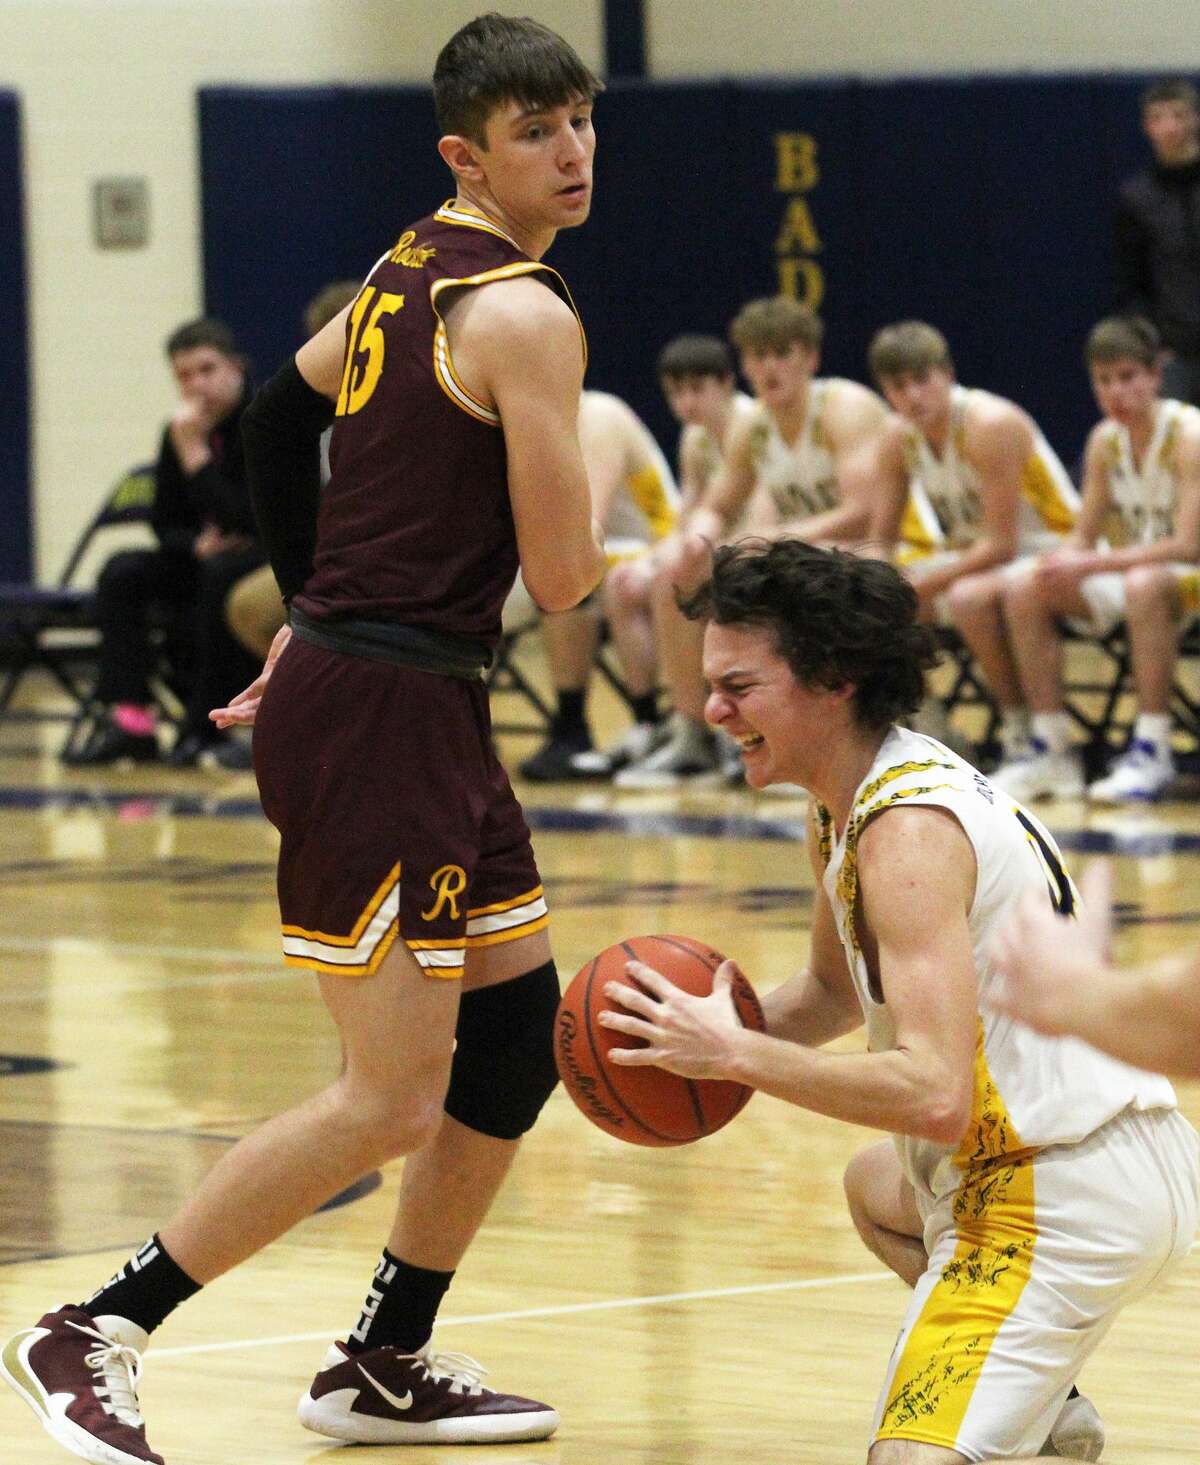 The Bad Axe boys basketball team dropped a home game to Reese, 57-43, on Wednesday night.